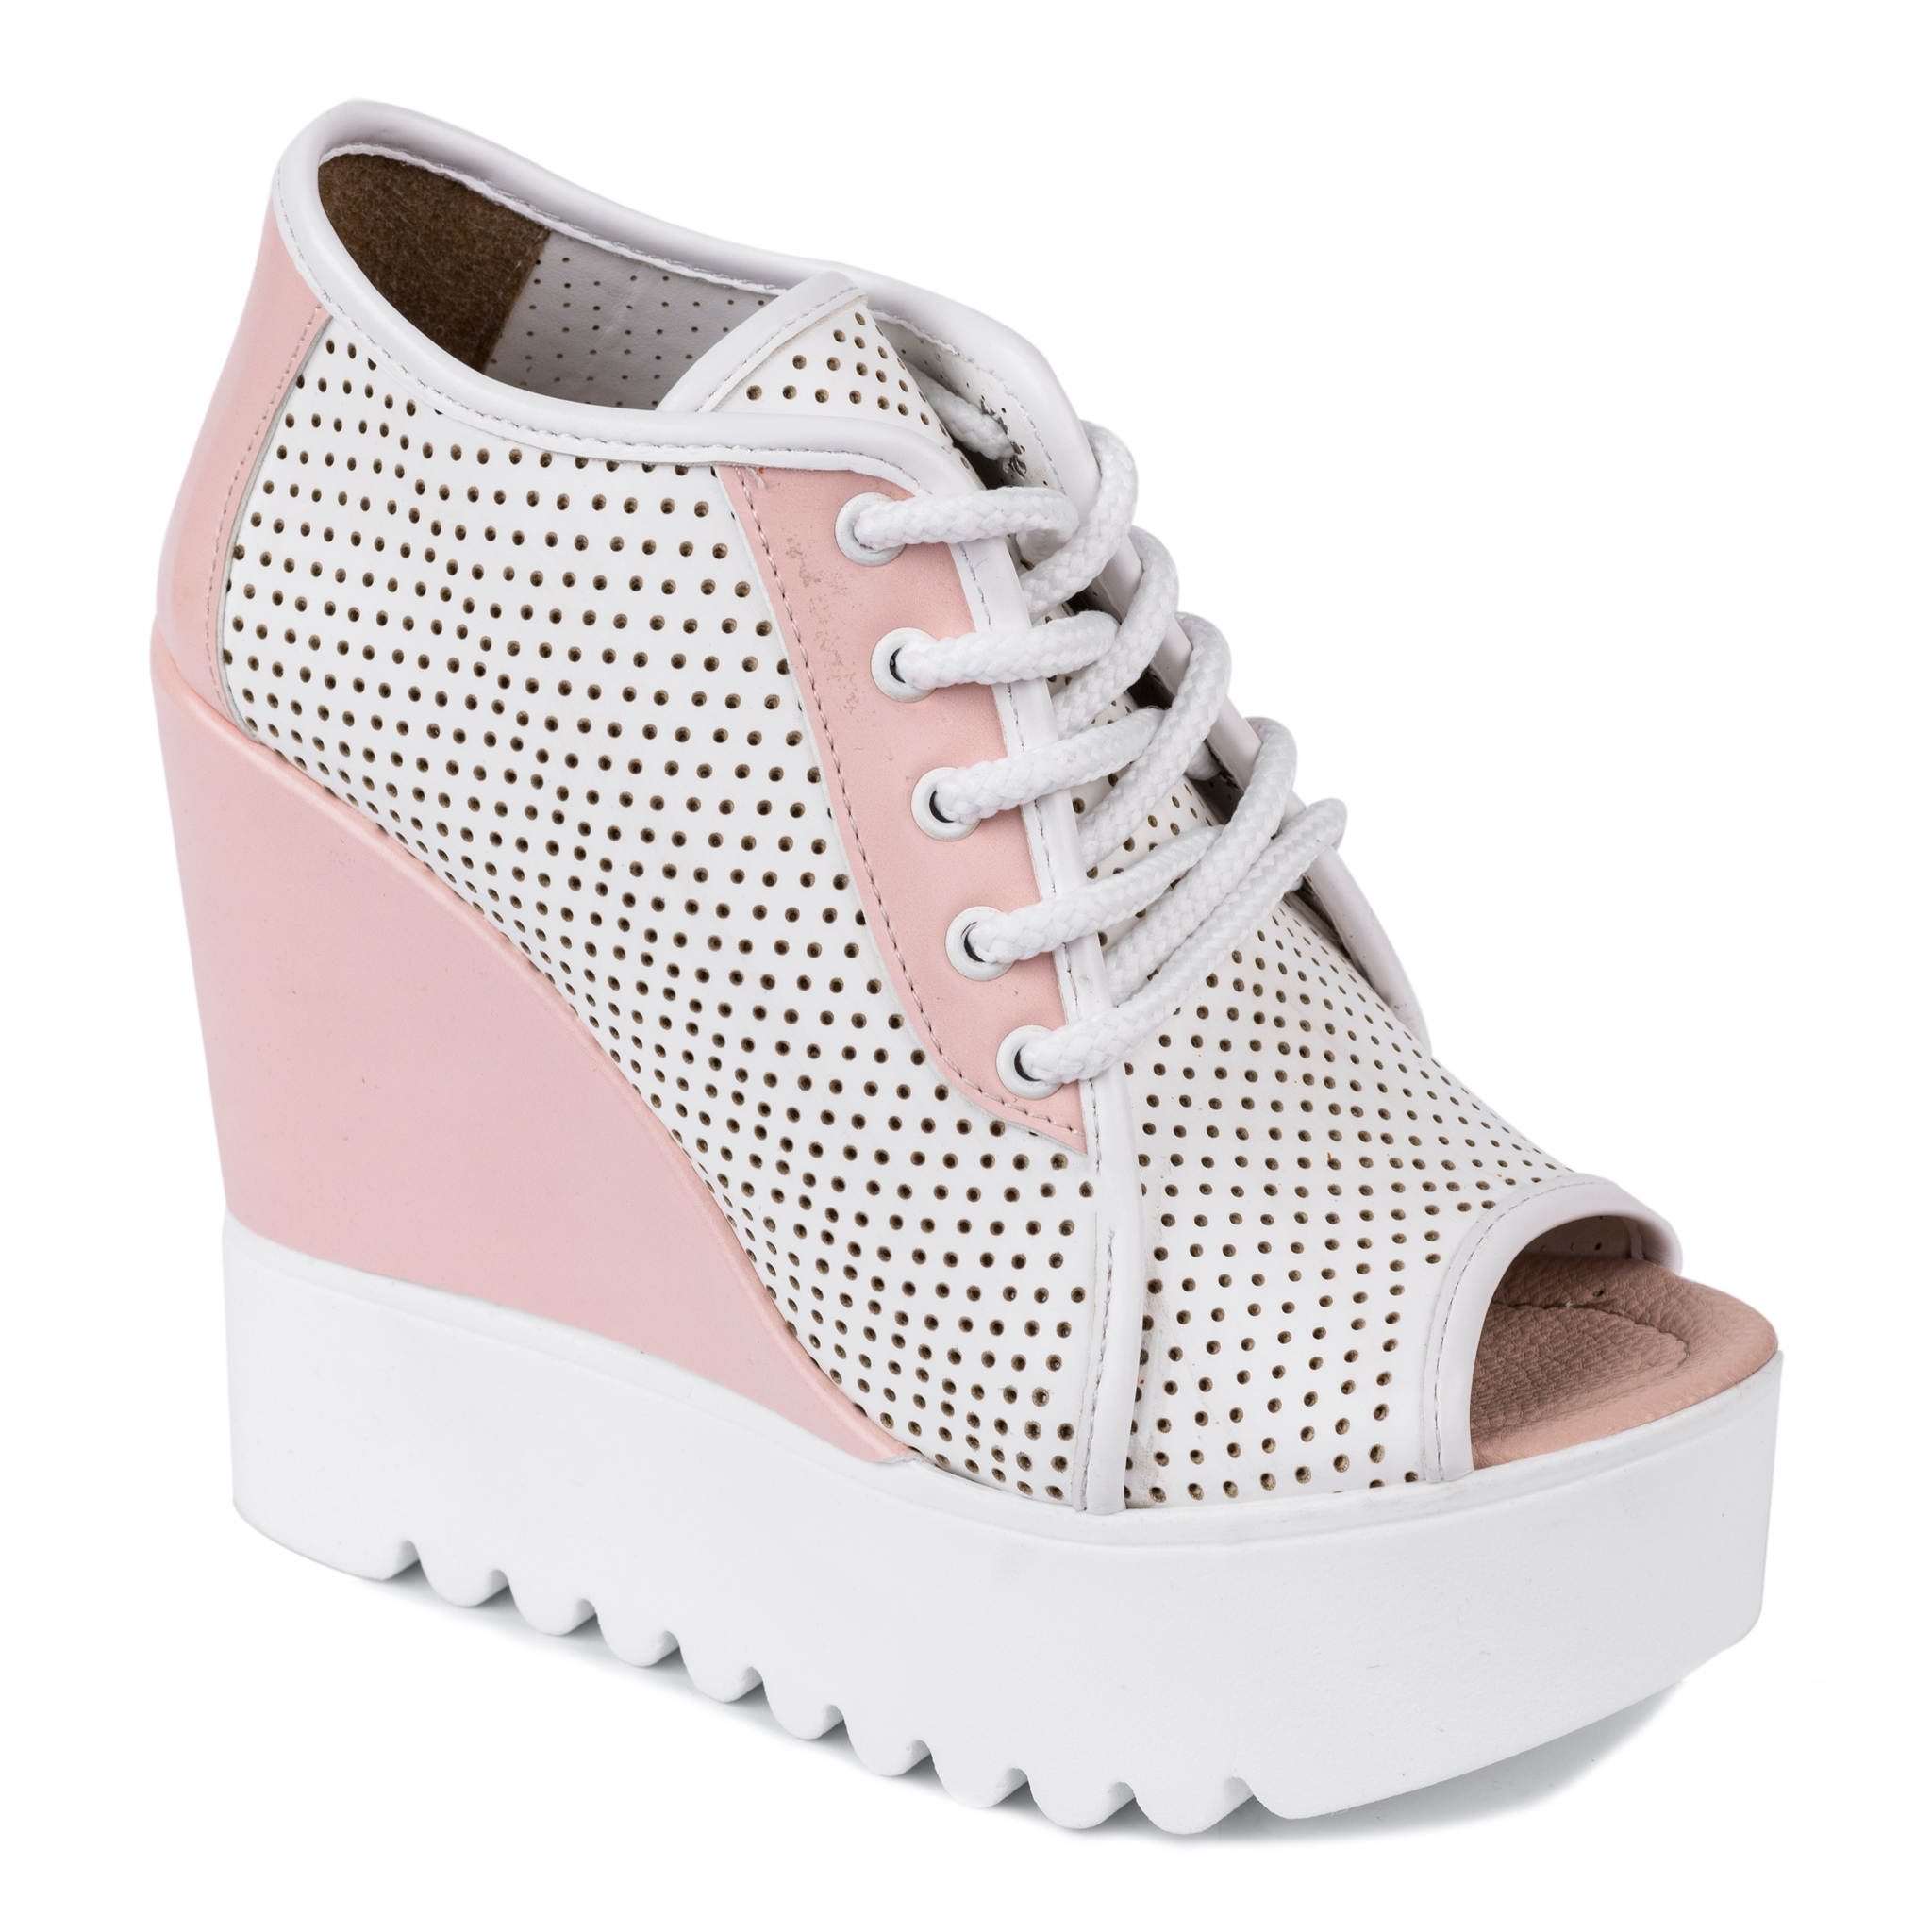 HOLLOW WEDGE SHOES - WHITE/ROSE